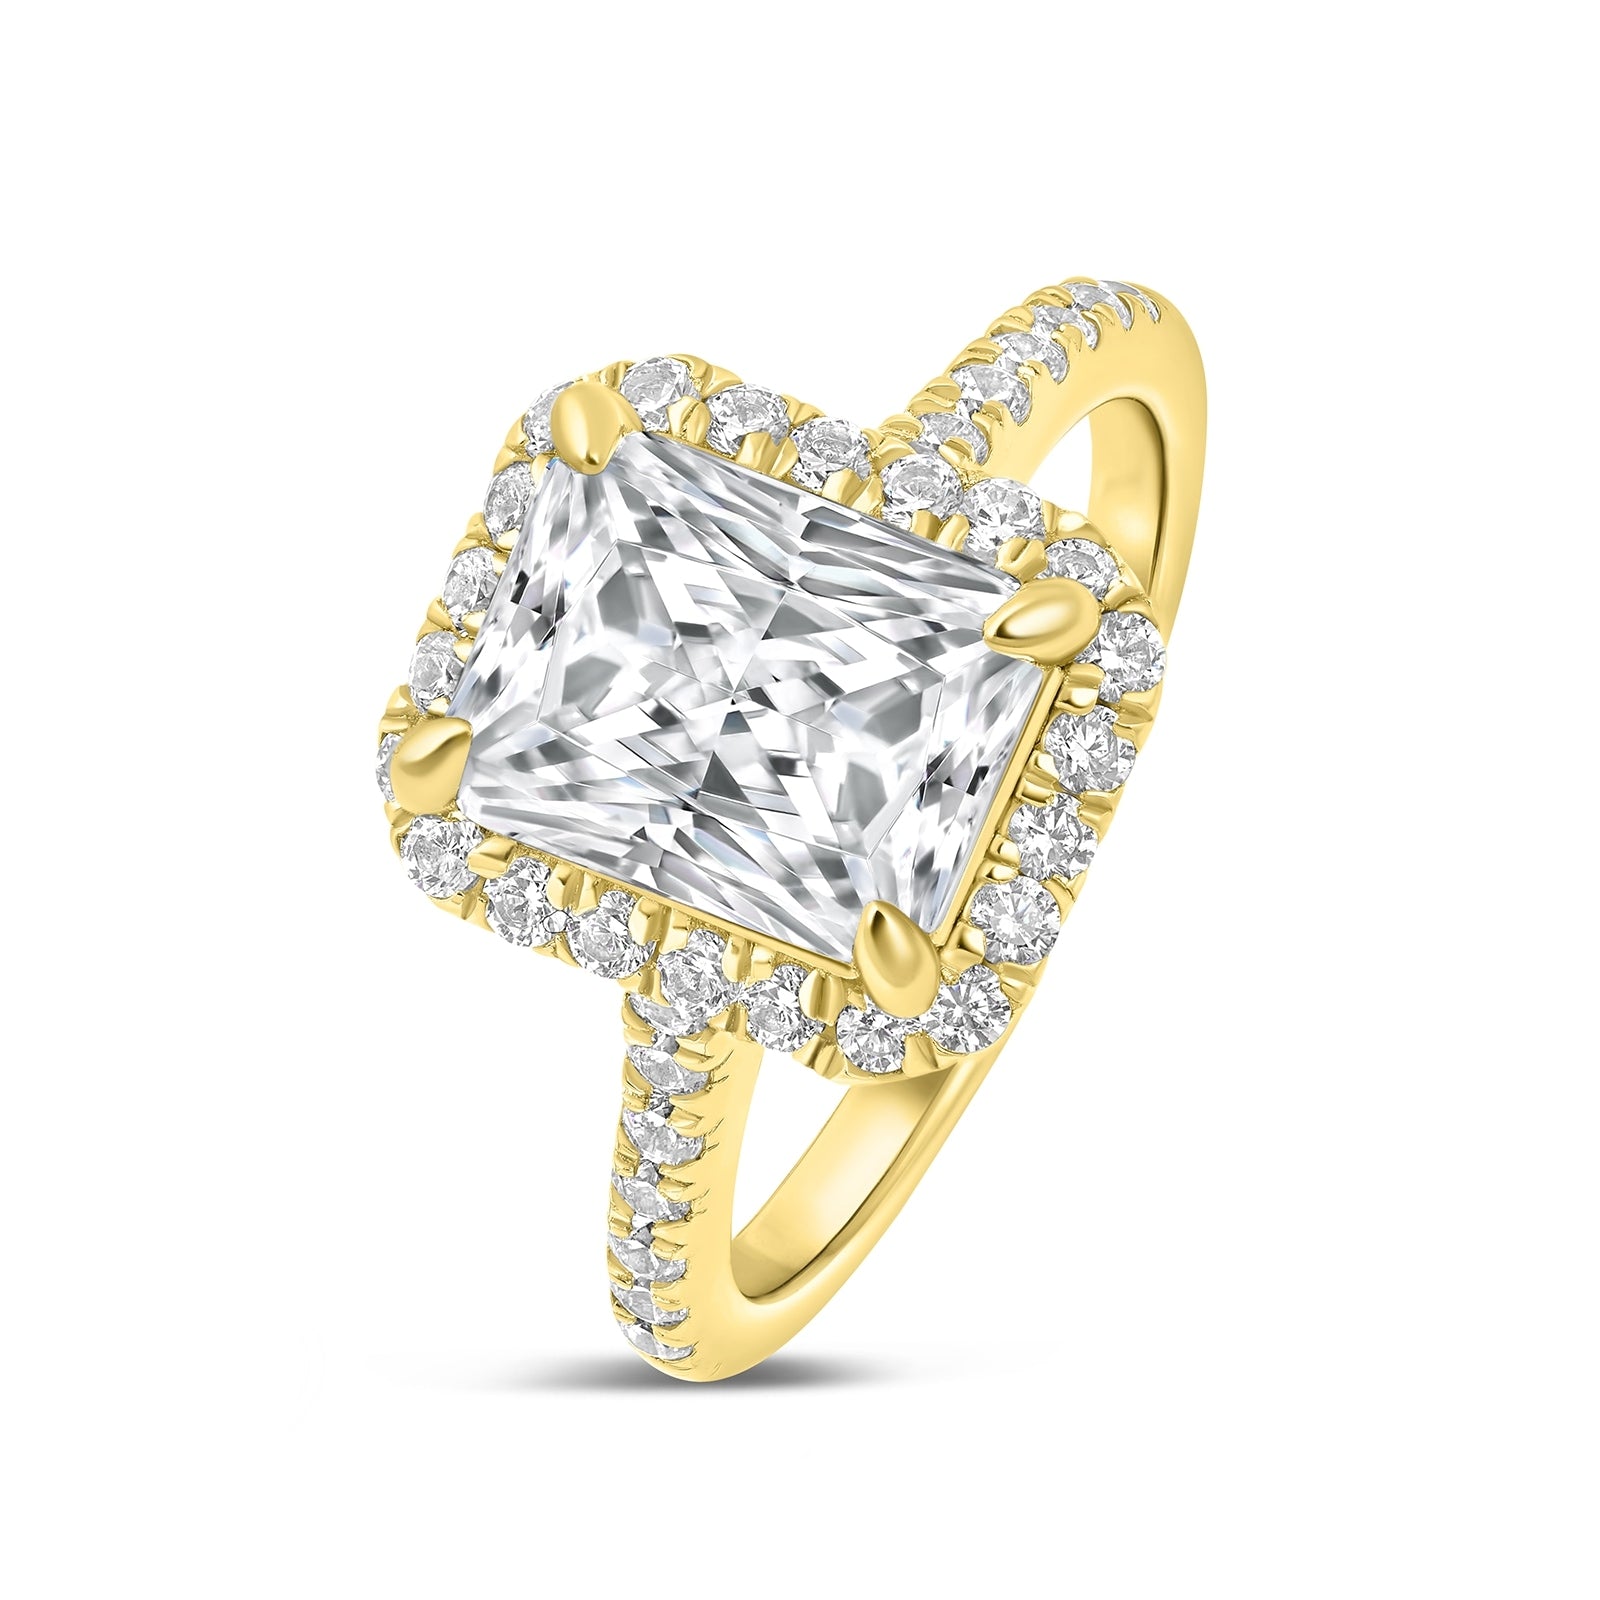 gold radiant cut engagement ring with halo and half eternity band positioned at a slight angle to show detailing